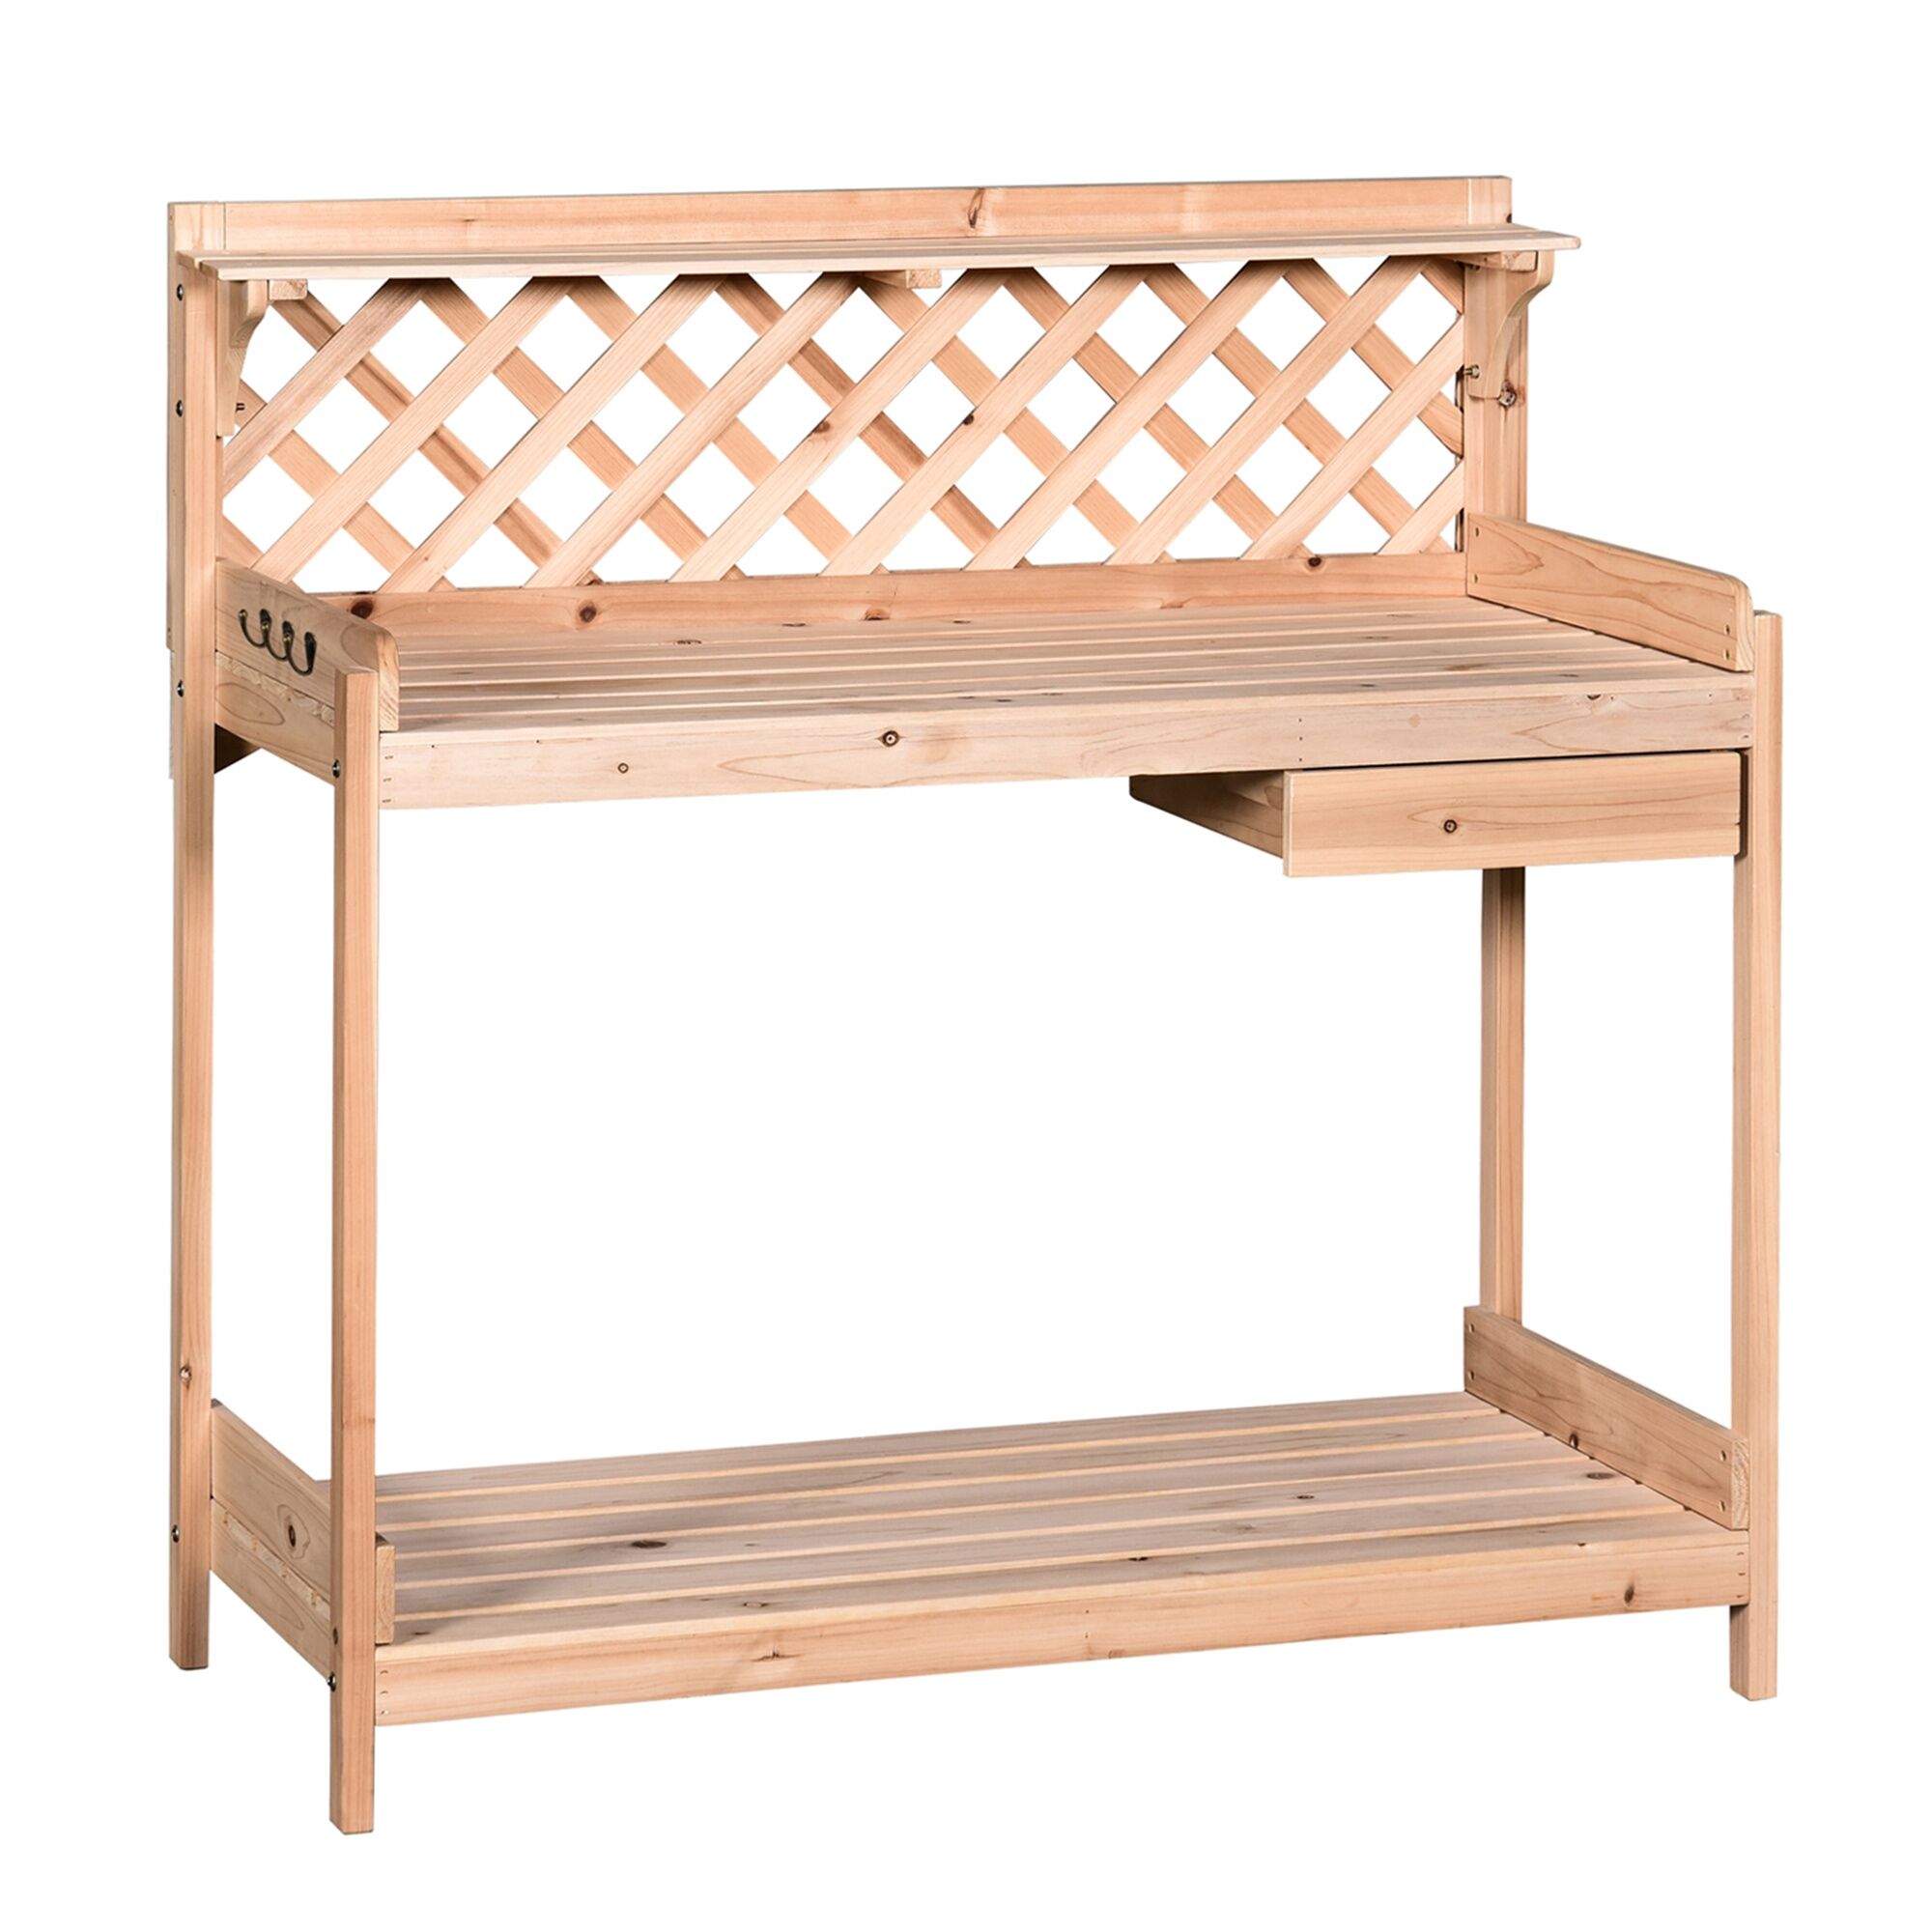 Outsunny Outdoor Garden Potting Bench, Wooden Workstation Table w/ Drawer, Hooks, Open Shelf, Lower Storage and Lattice Back for Patio, Backyard